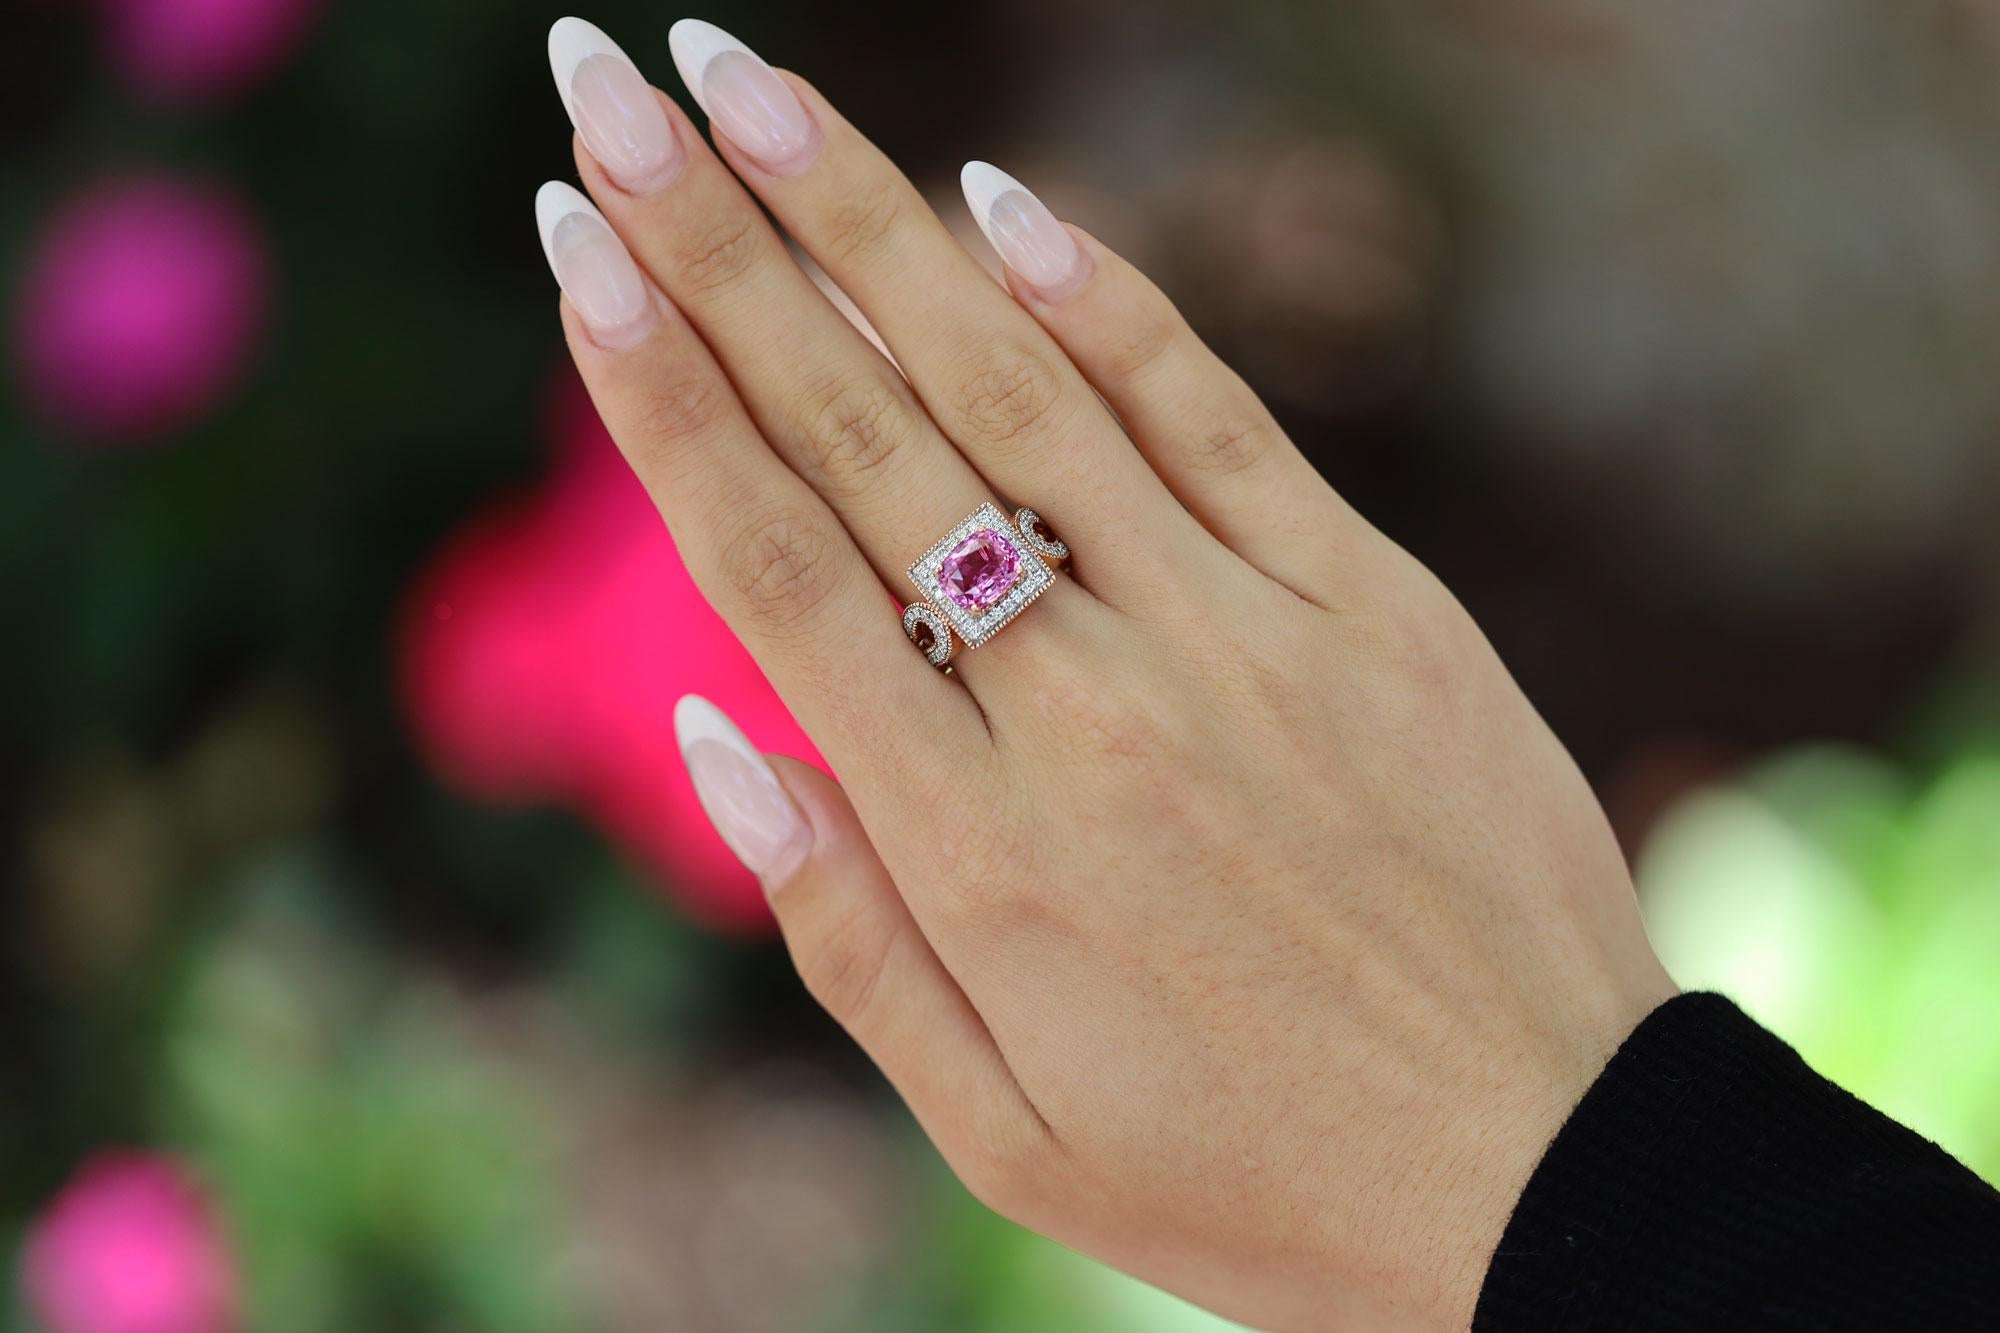 When our gemologist selected this rare, deeply saturated pink sapphire, we had no idea how this hybrid gemstone engagement ring/cocktail ring would turn out. Our designer decided on a non traditional wedding ring, setting the fabulous gem in an